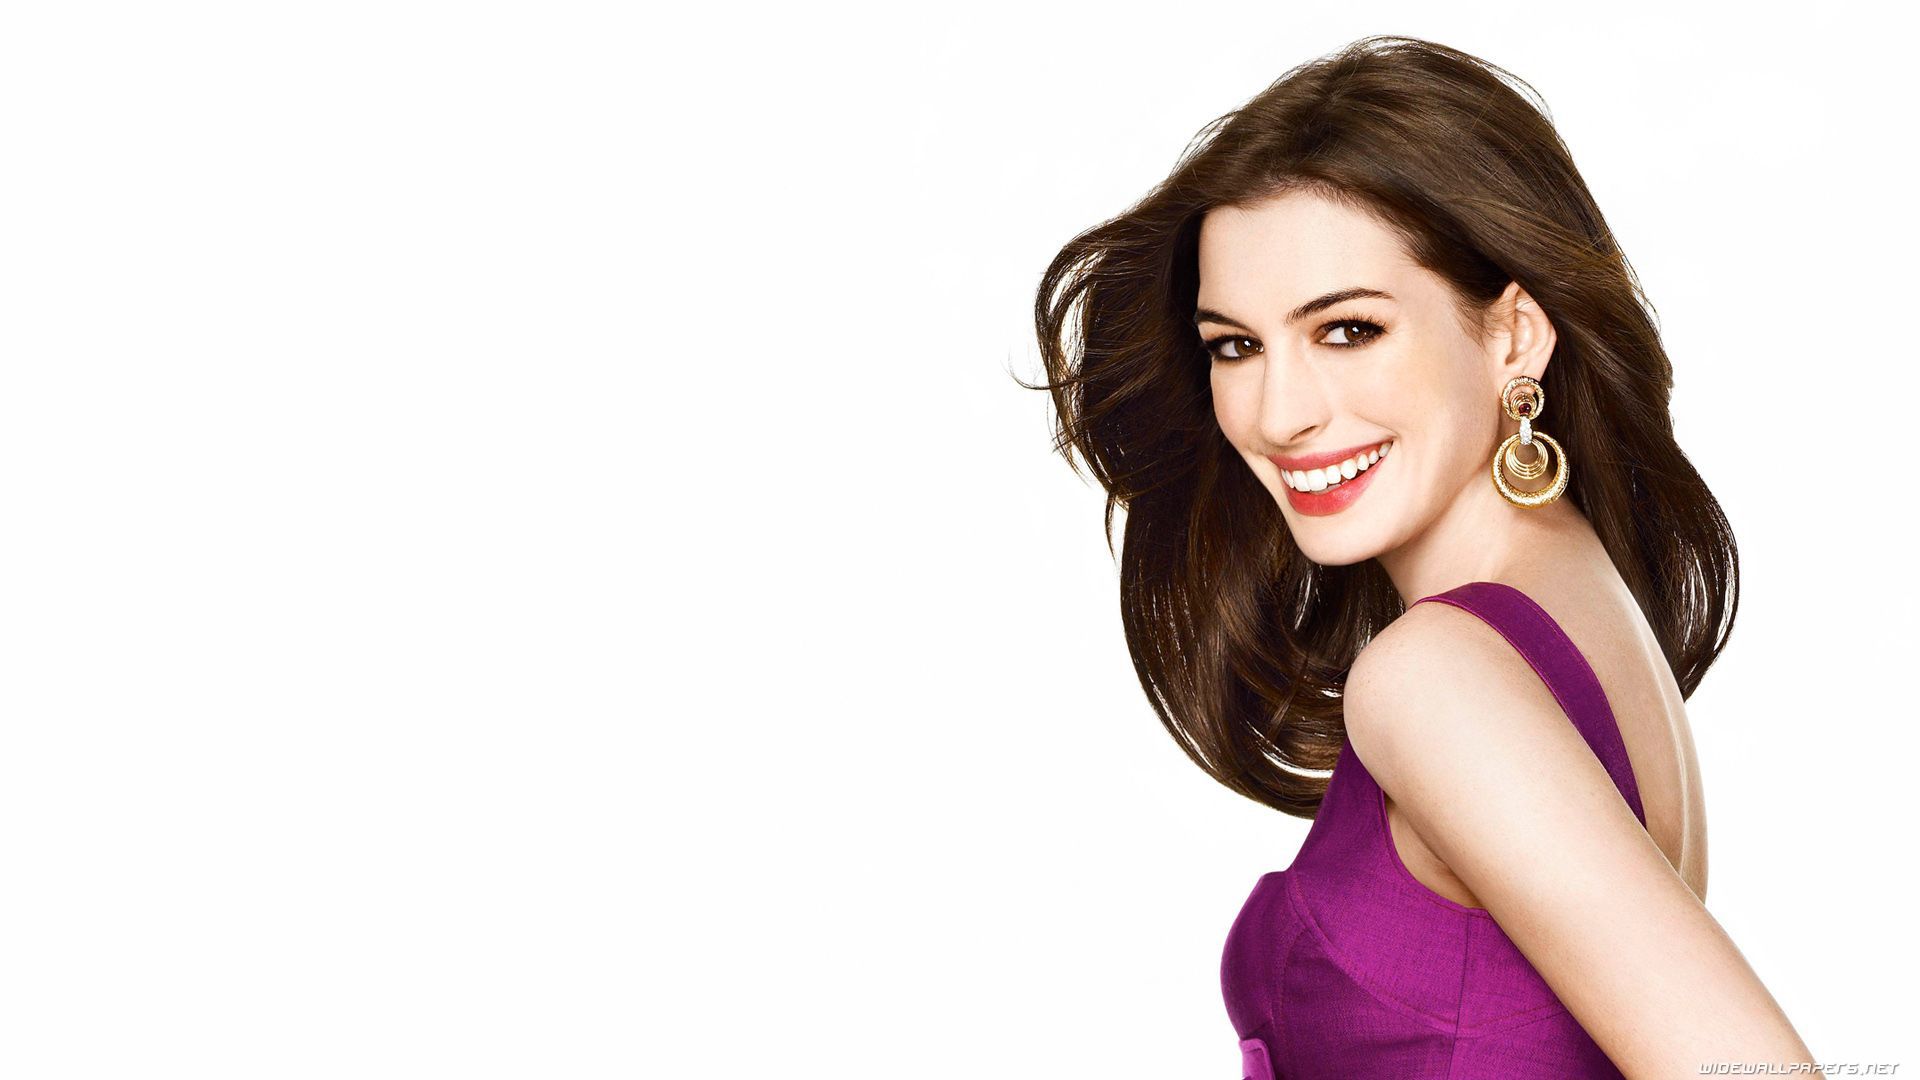 Anne Hathaway Wallpaper Image Photos Pictures Background